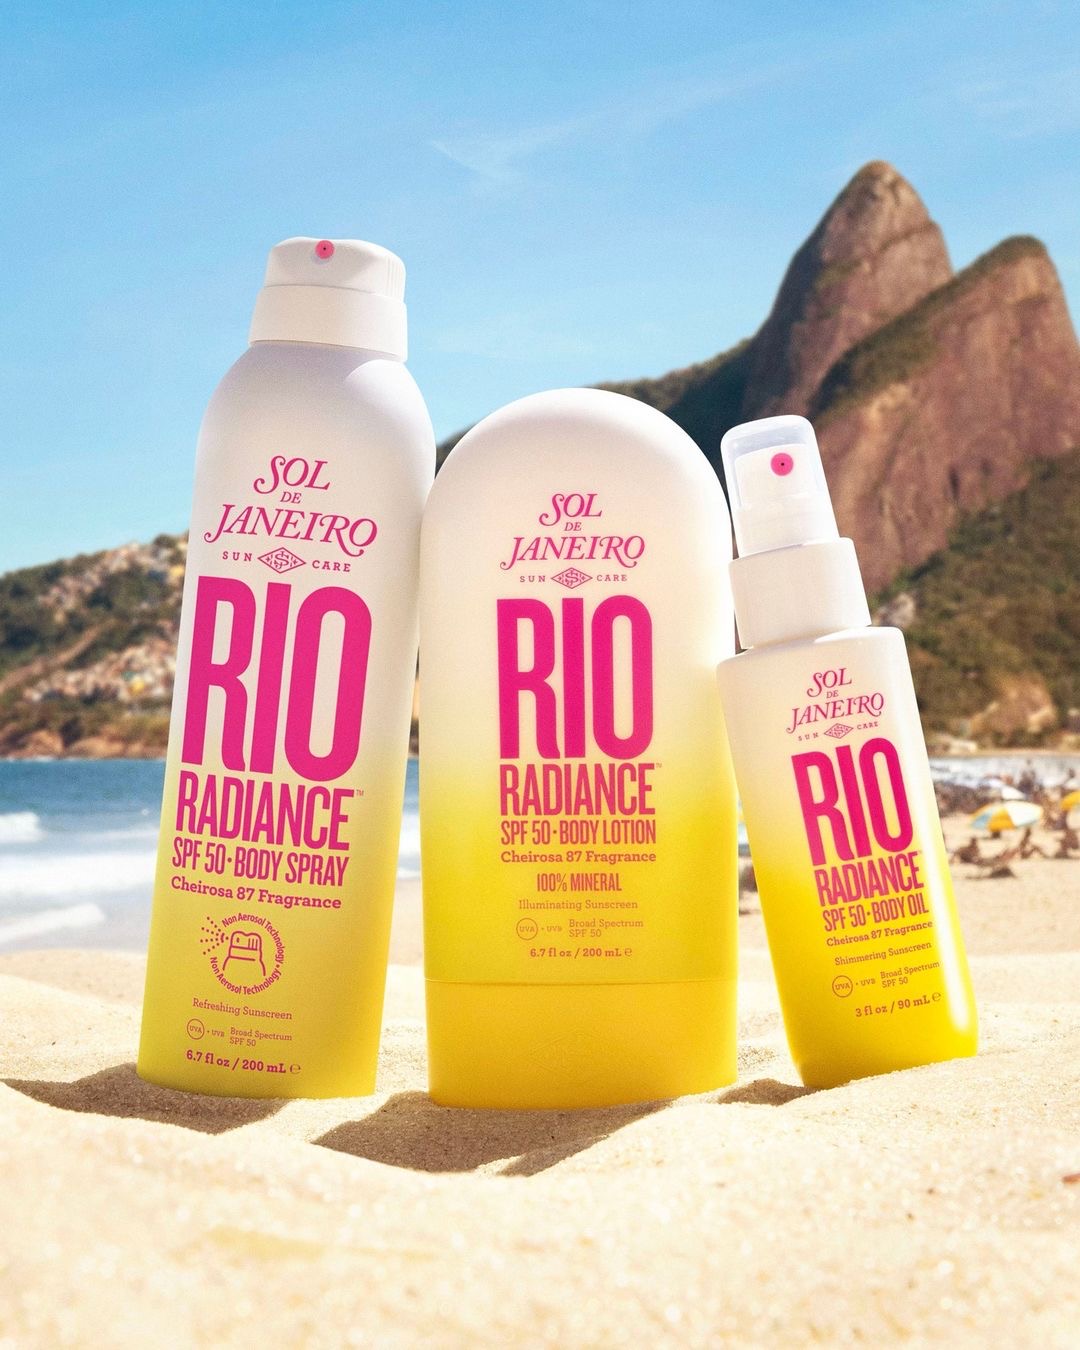 Sol de Janeiro Rio Radiance SPF 50 Line is Our New Sun Care Obsession...